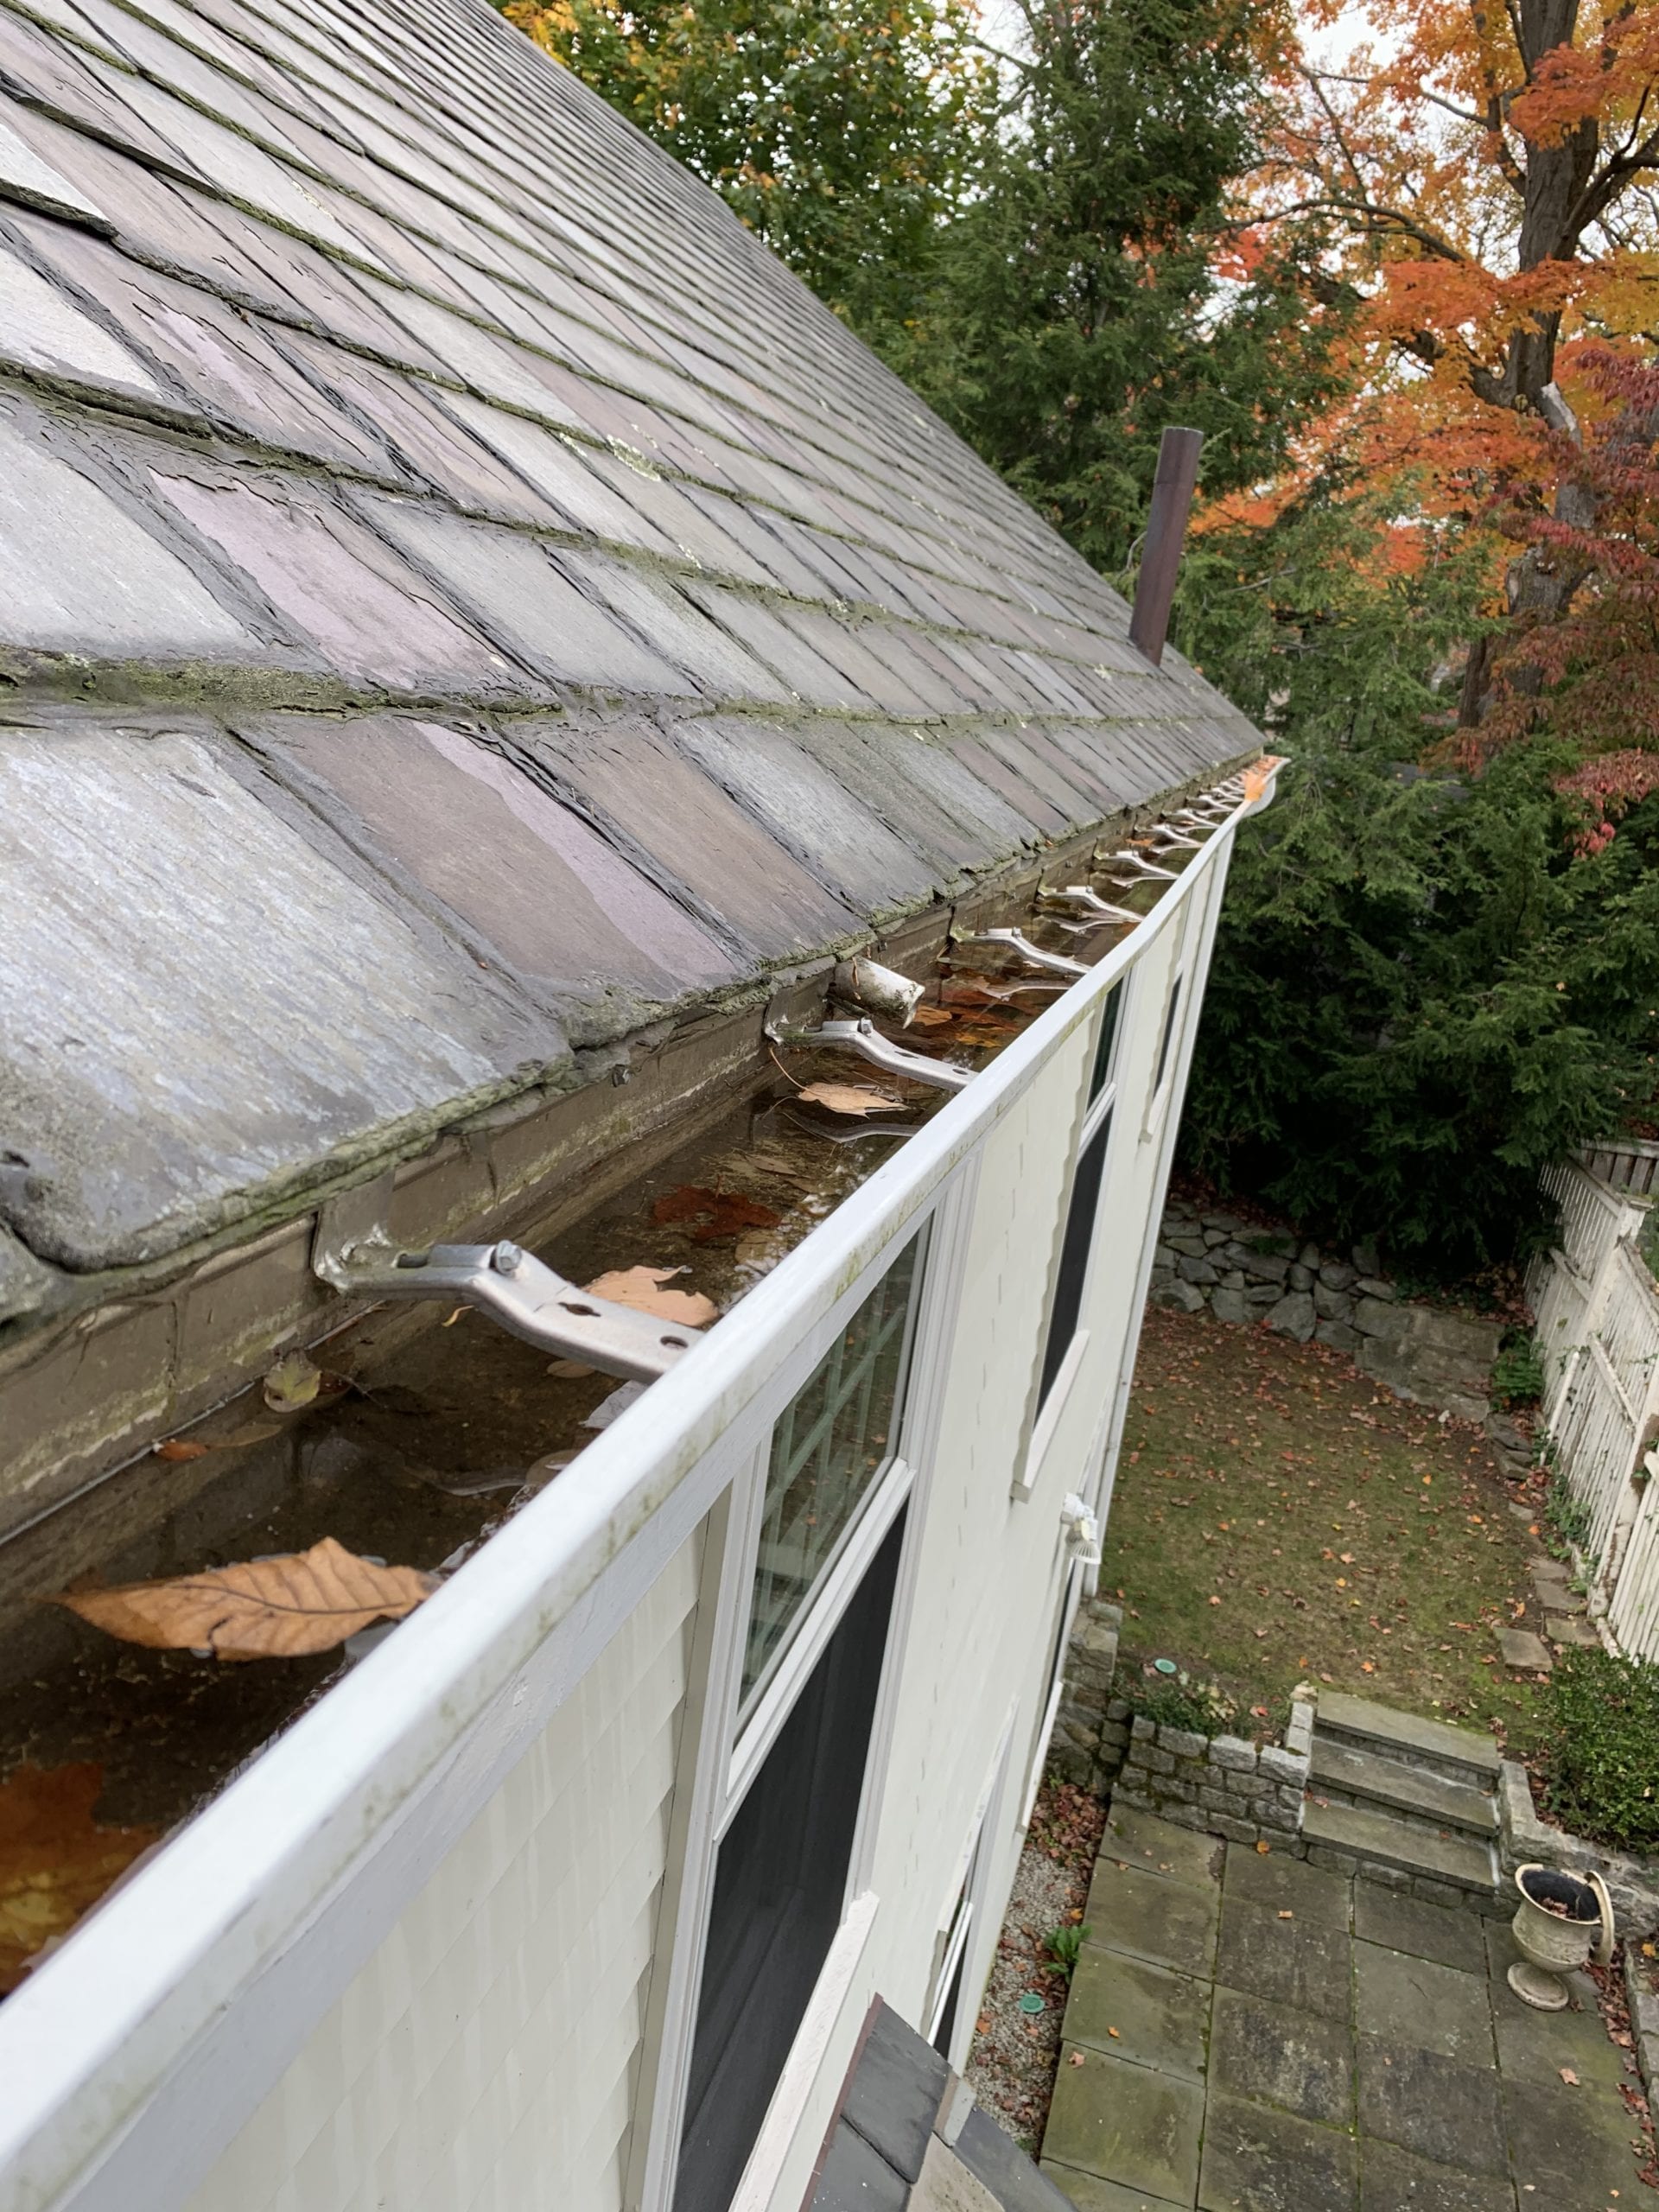 Flooded and leaves in old gutters.